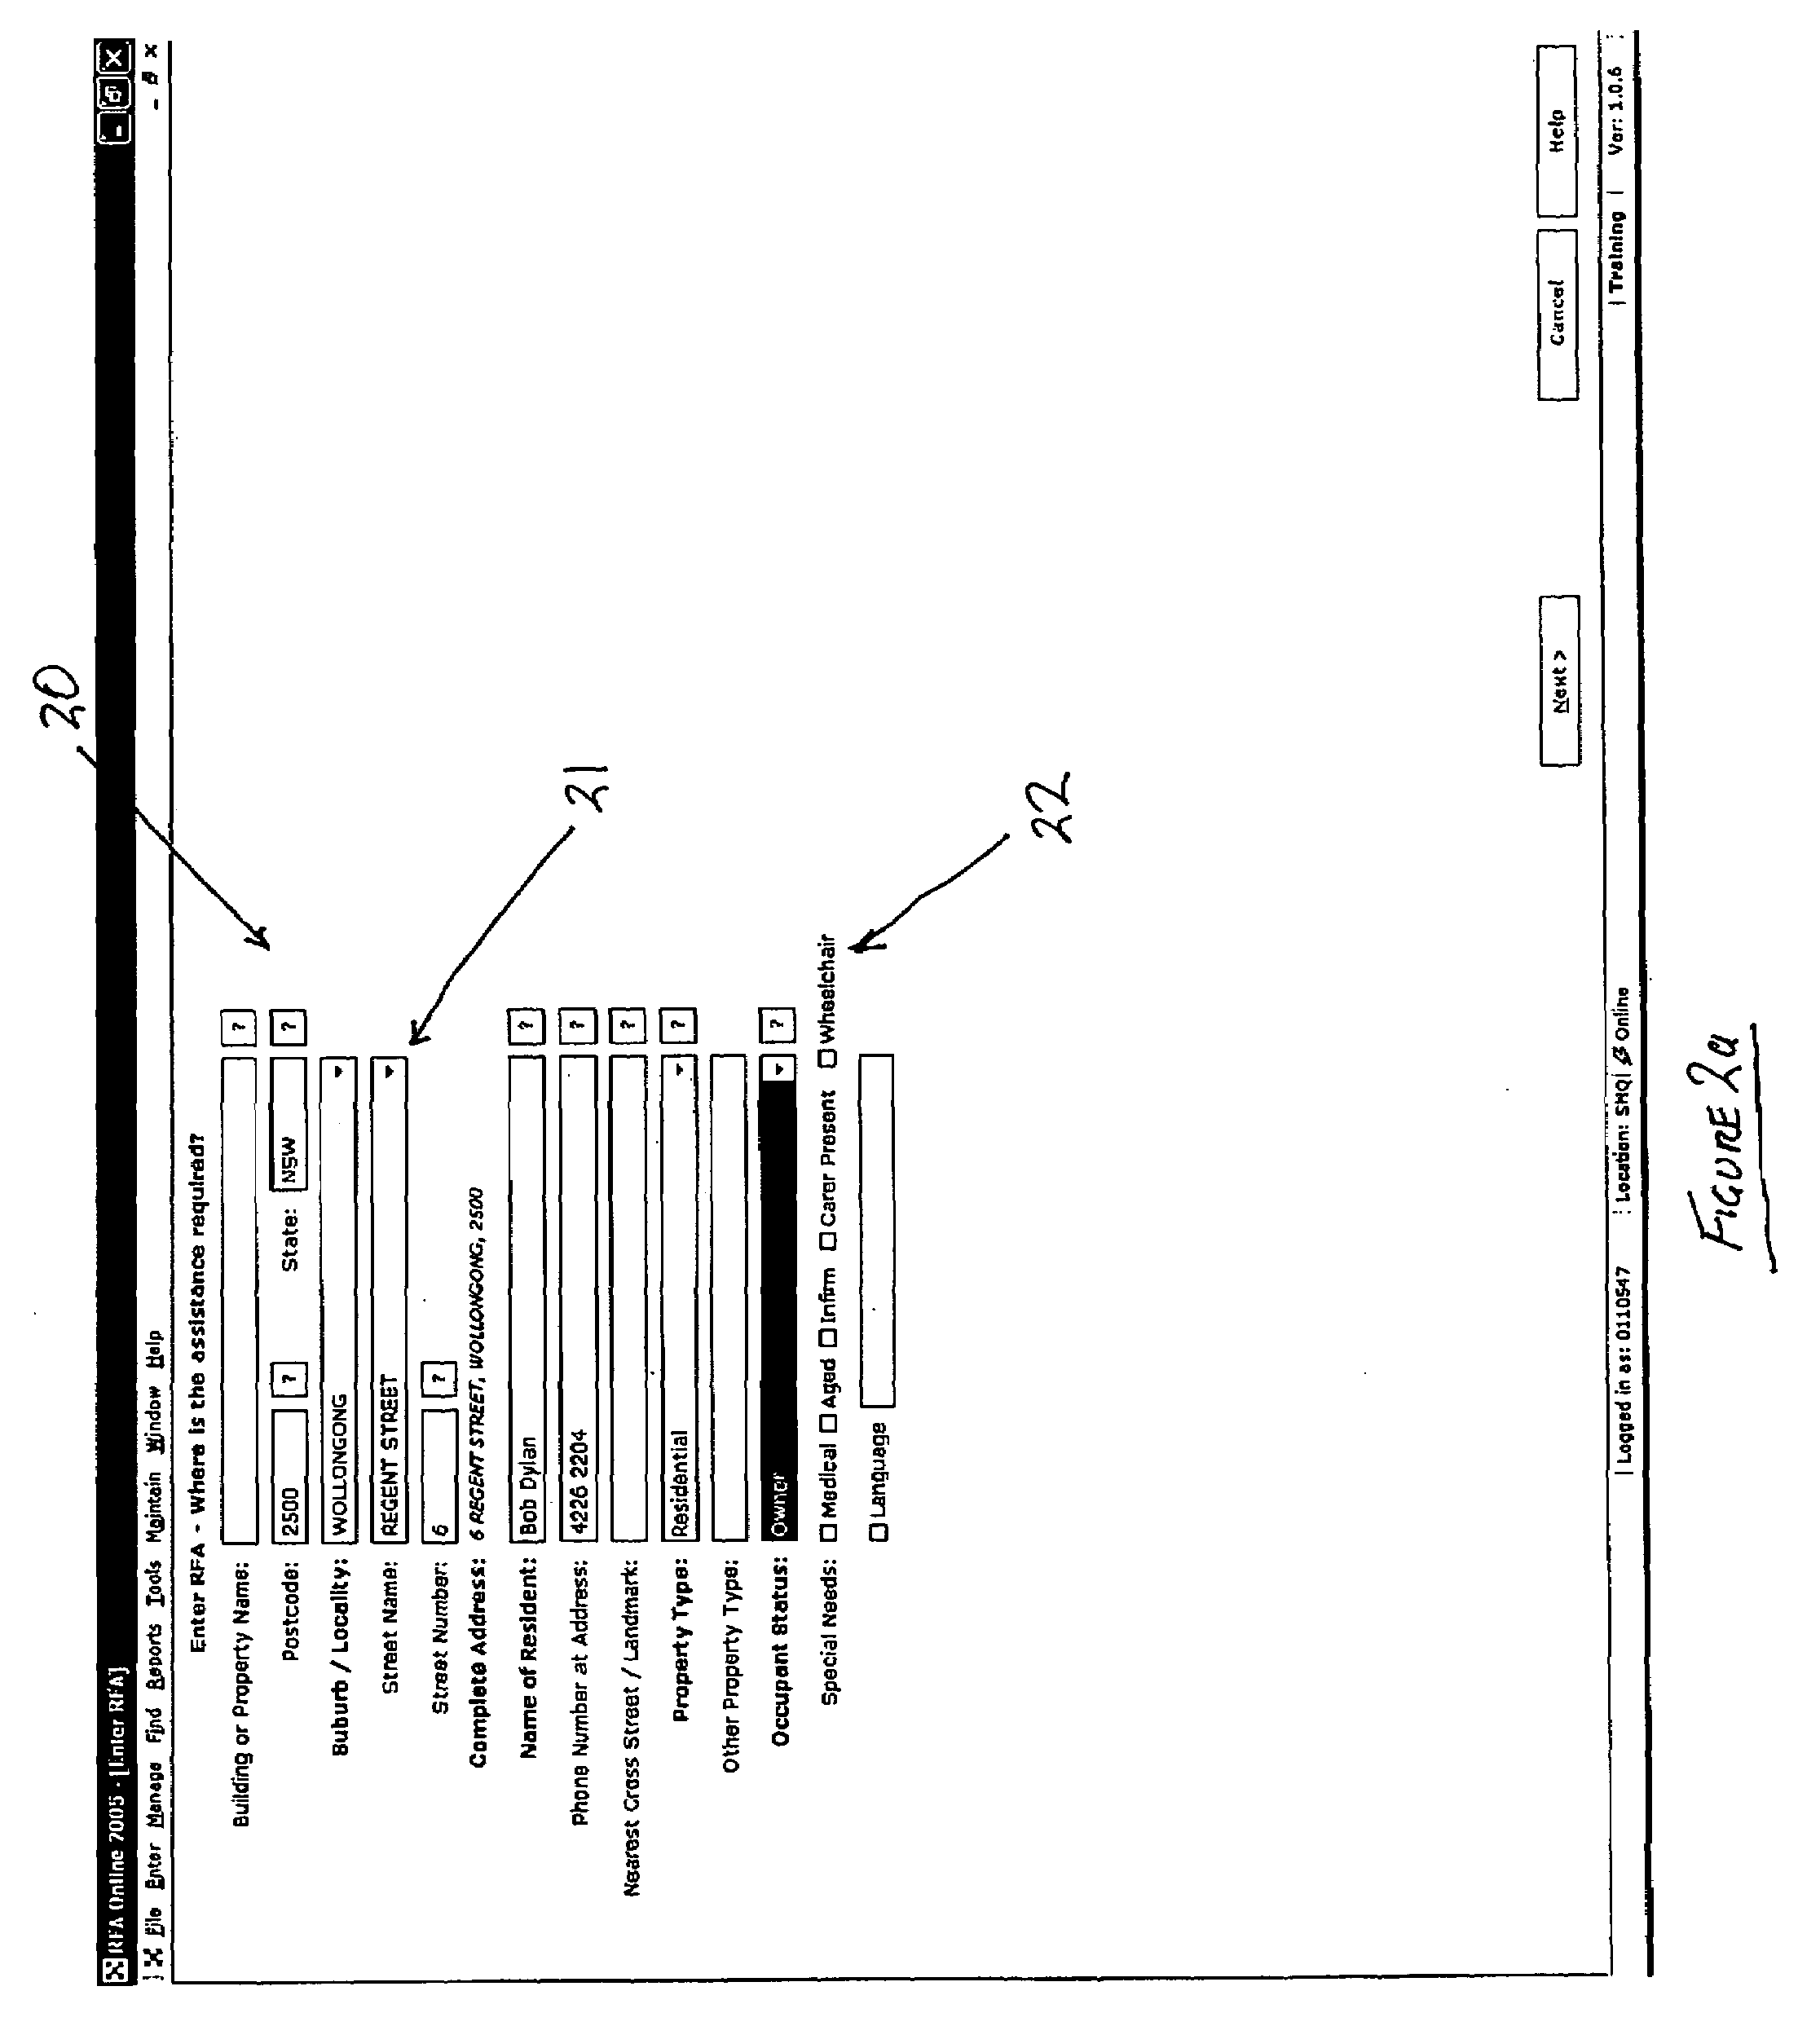 System and method for coordinating remote response services